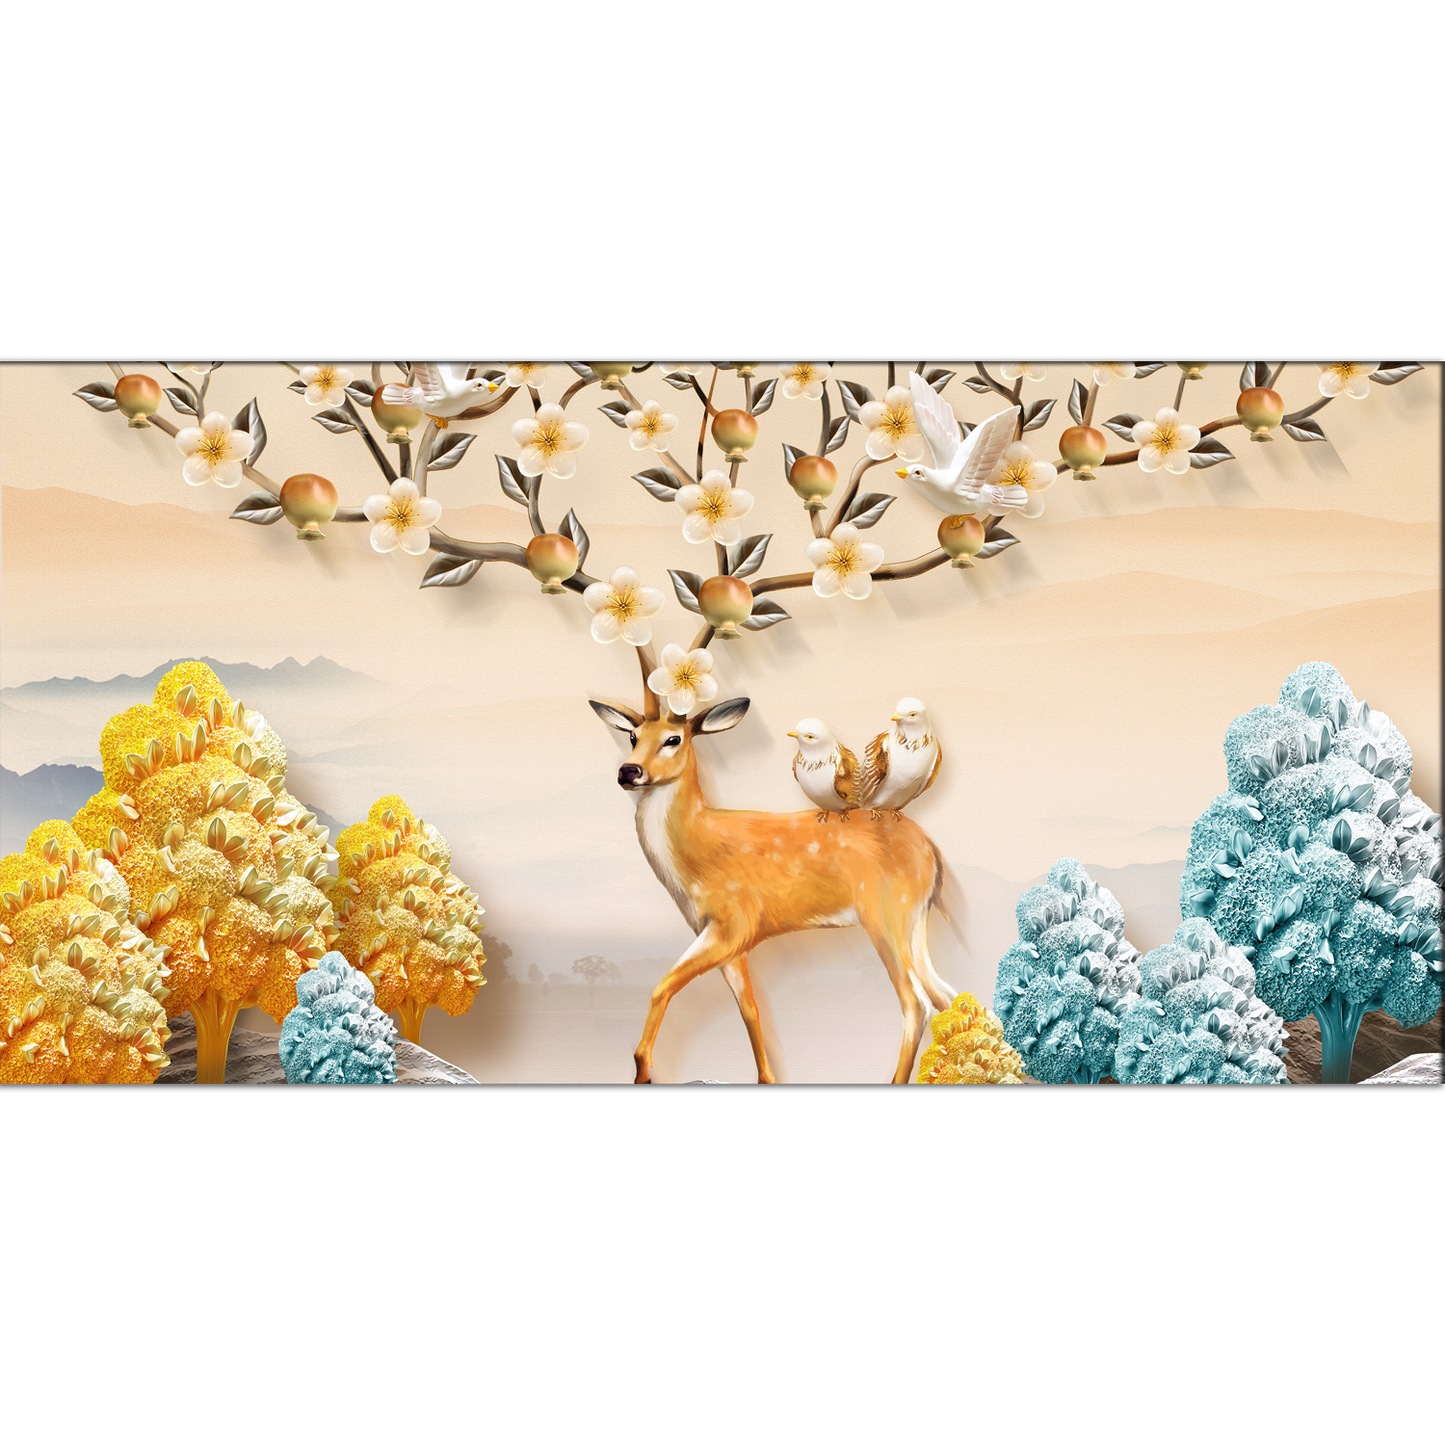 Deer, Leaves and Flowers Canvas Print Wall Painting